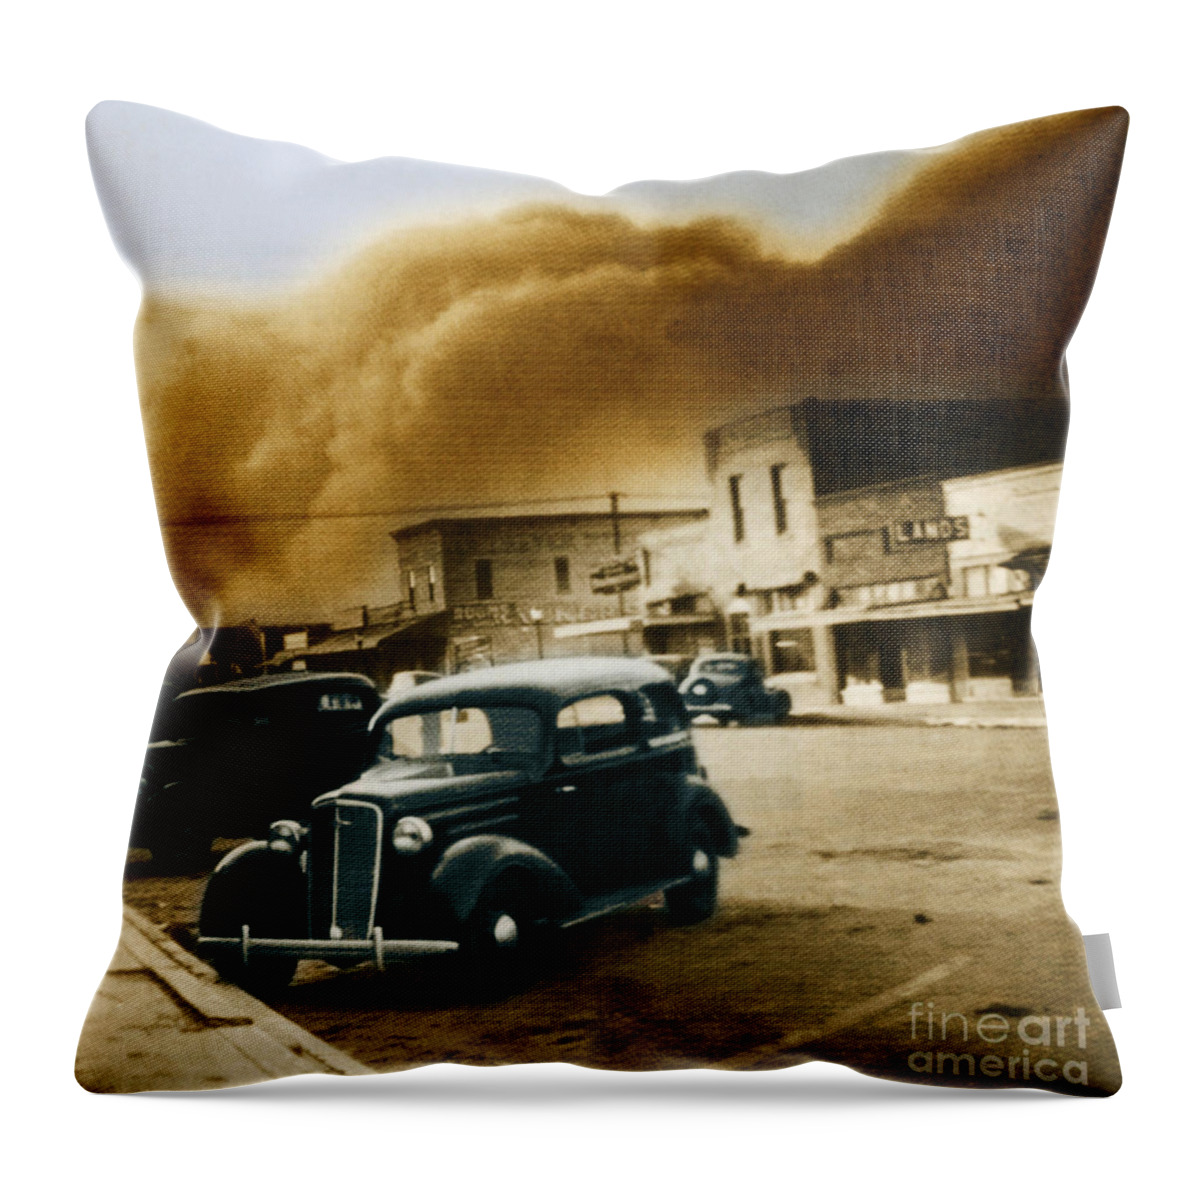 Enhanced Throw Pillow featuring the photograph Dust Bowl Of The 1930s Elkhart Kansas #2 by Science Source